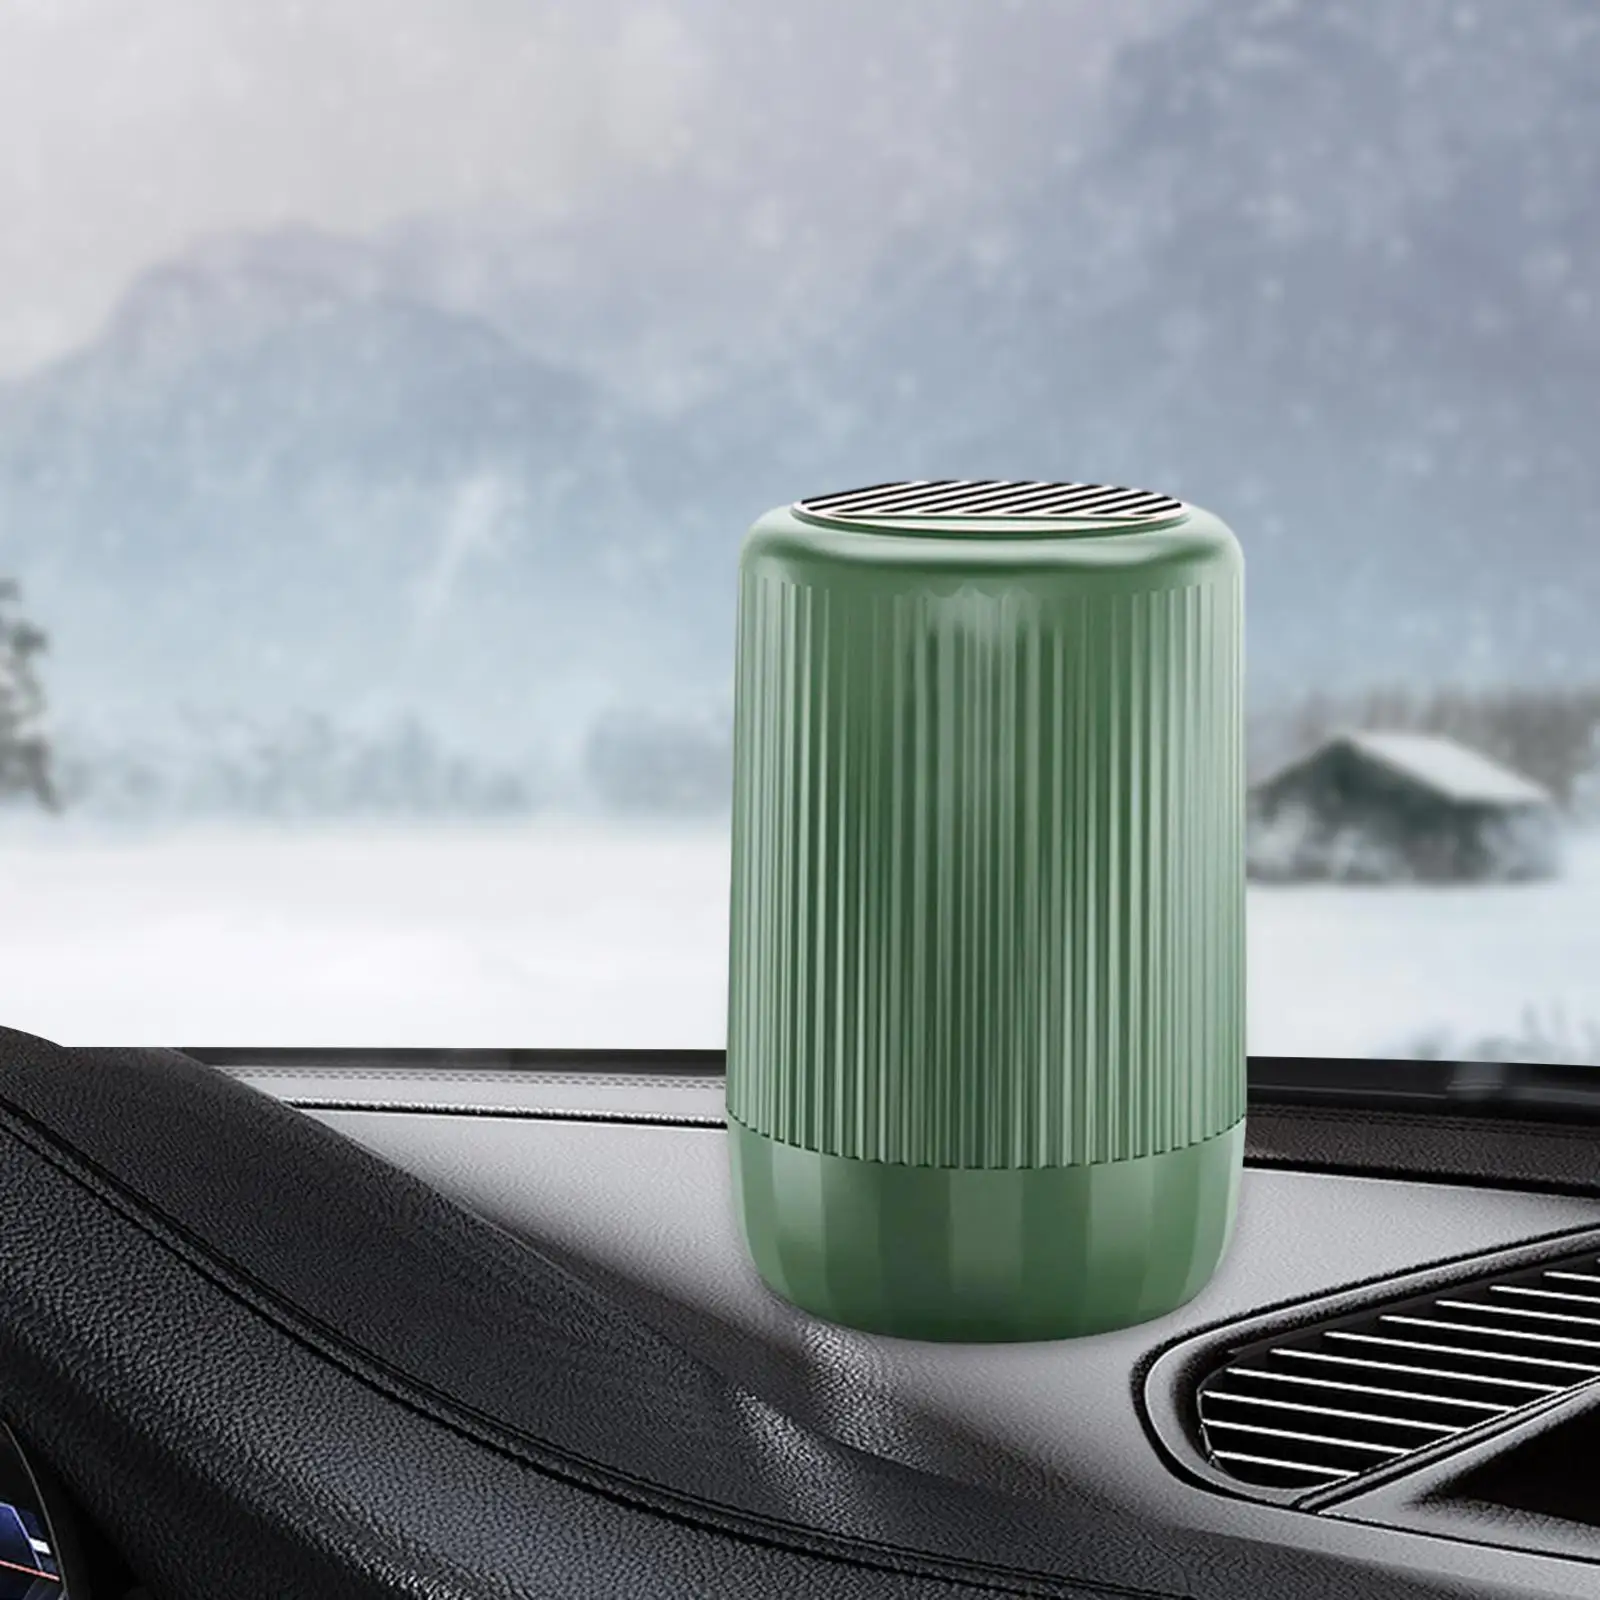 Vehicle Microwave Molecular Deicing Instrument Portable Diffuser Vehicles Microwave Car Deicer for Office Home Bedroom Car